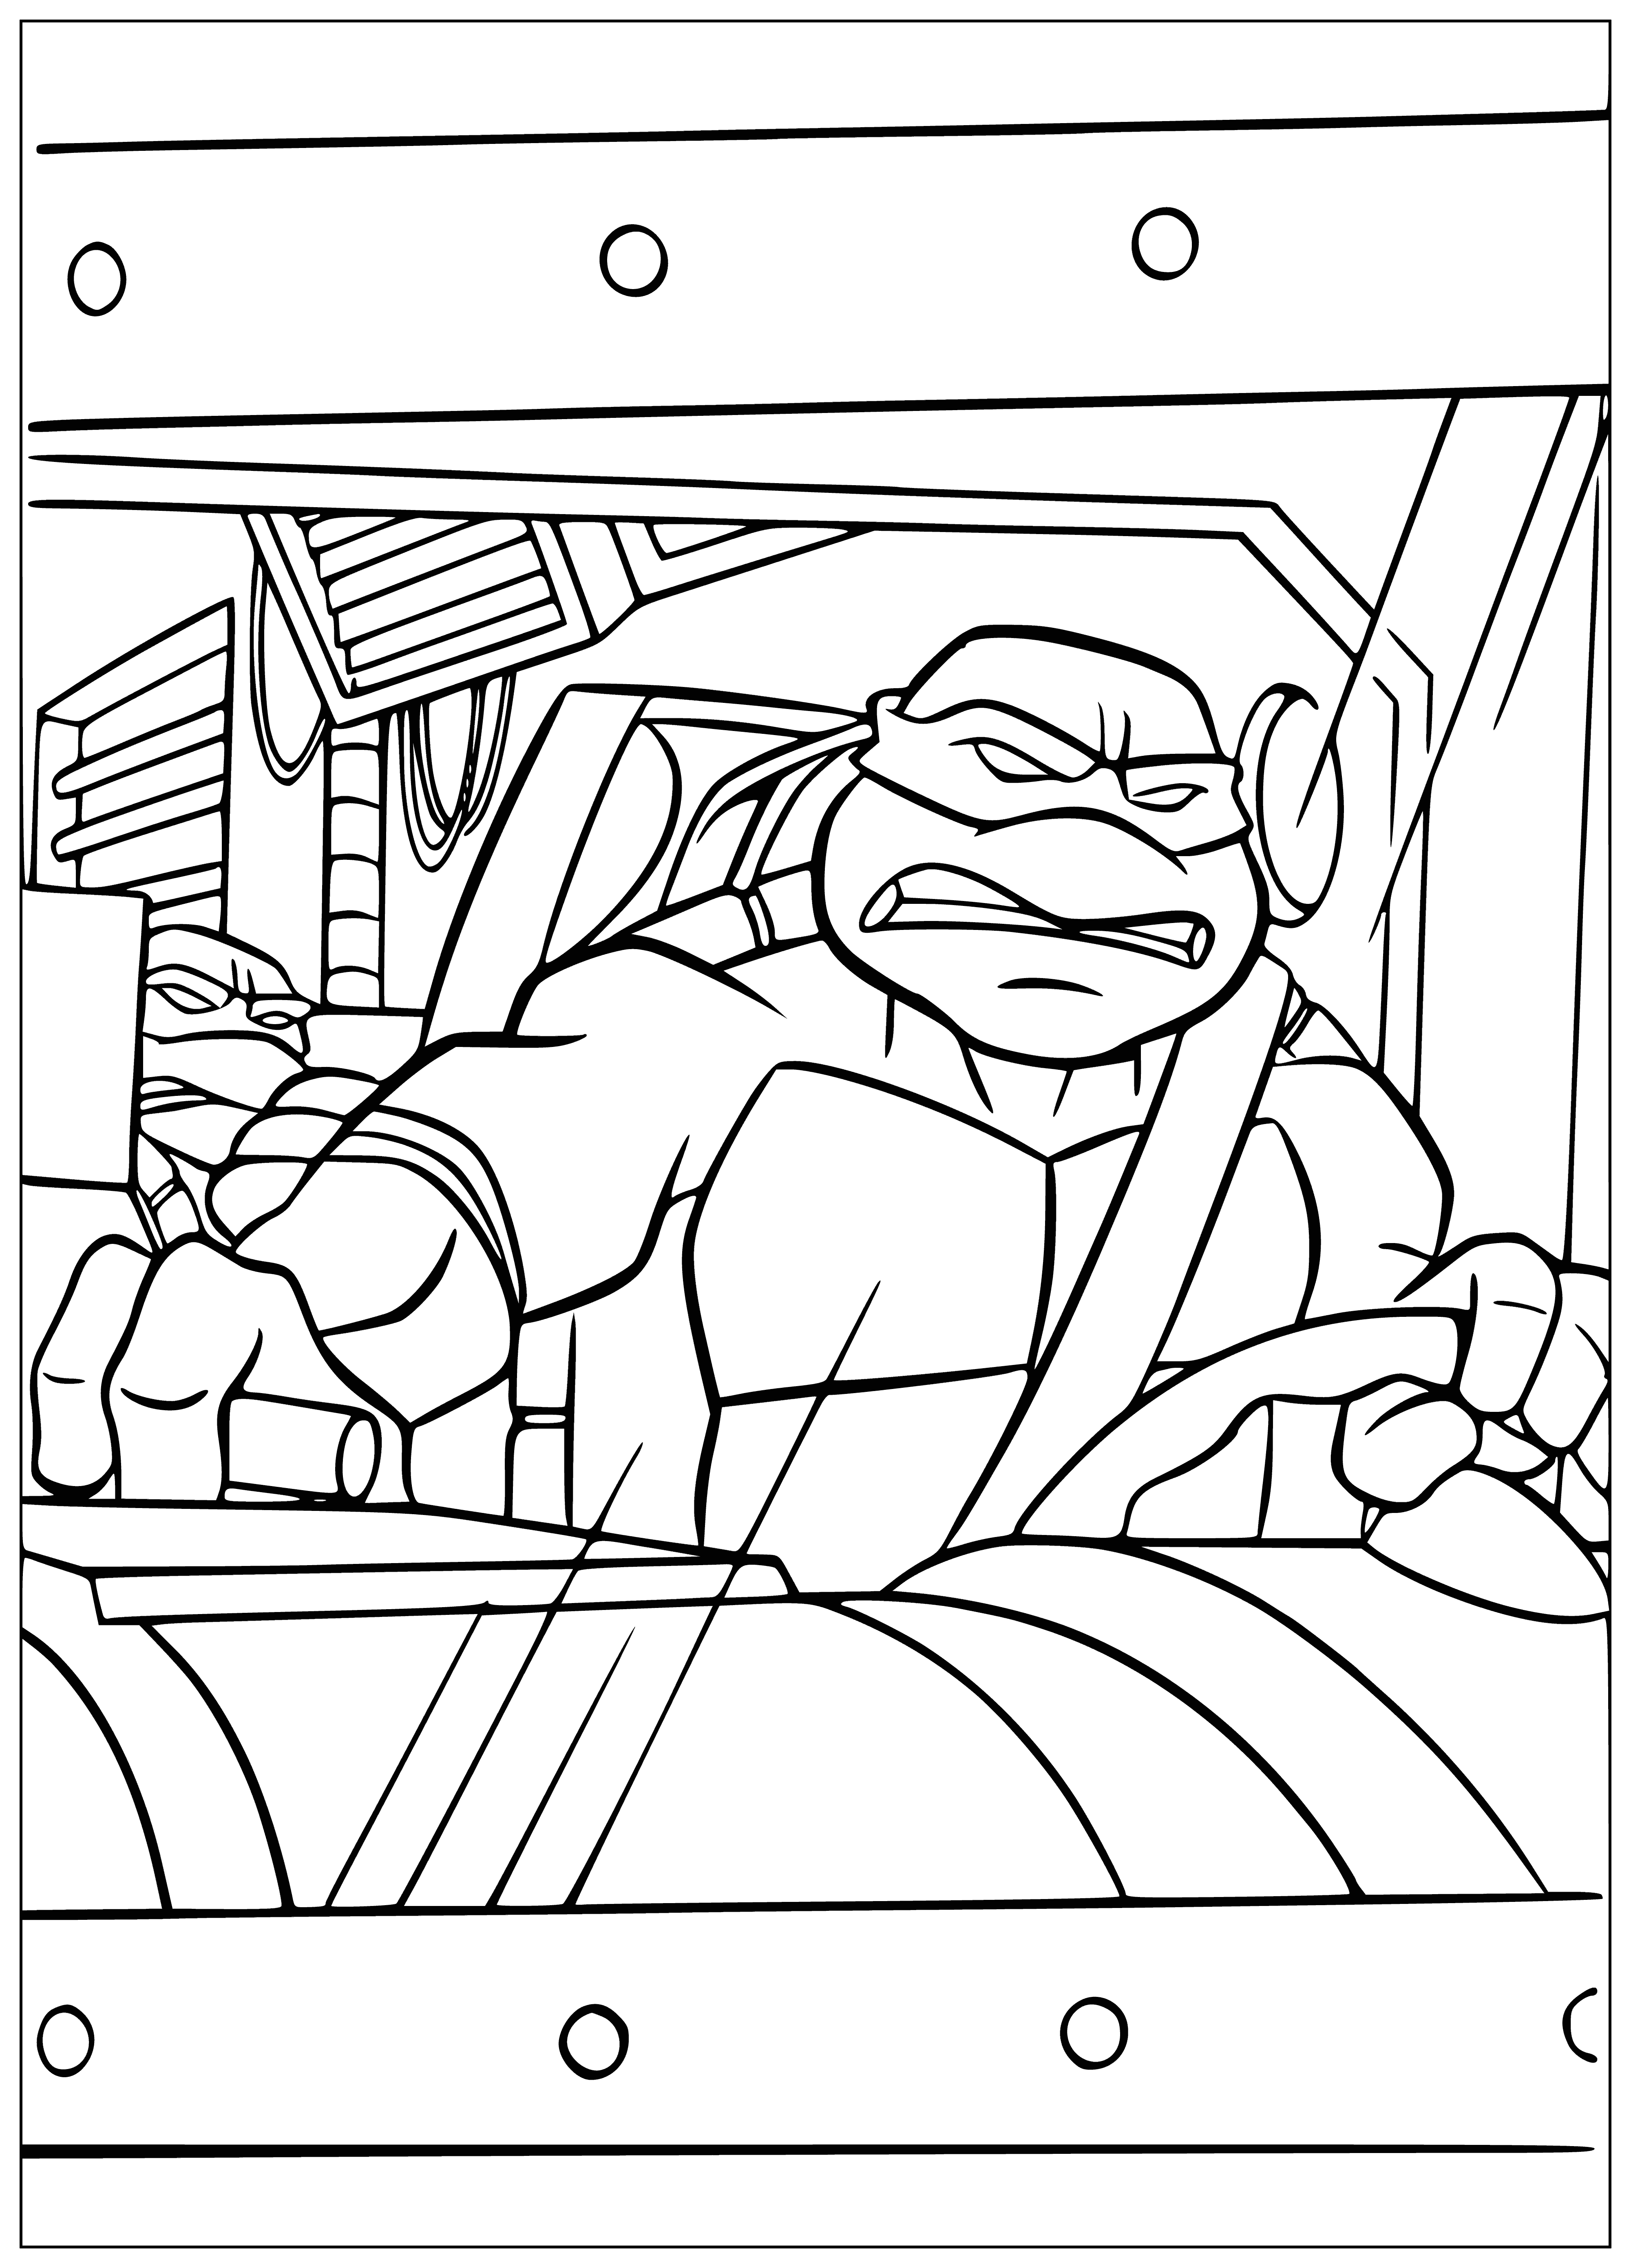 coloring page: A green car with turtle shell top, four wheels and a tail - perfect for coloring! #coloringpage